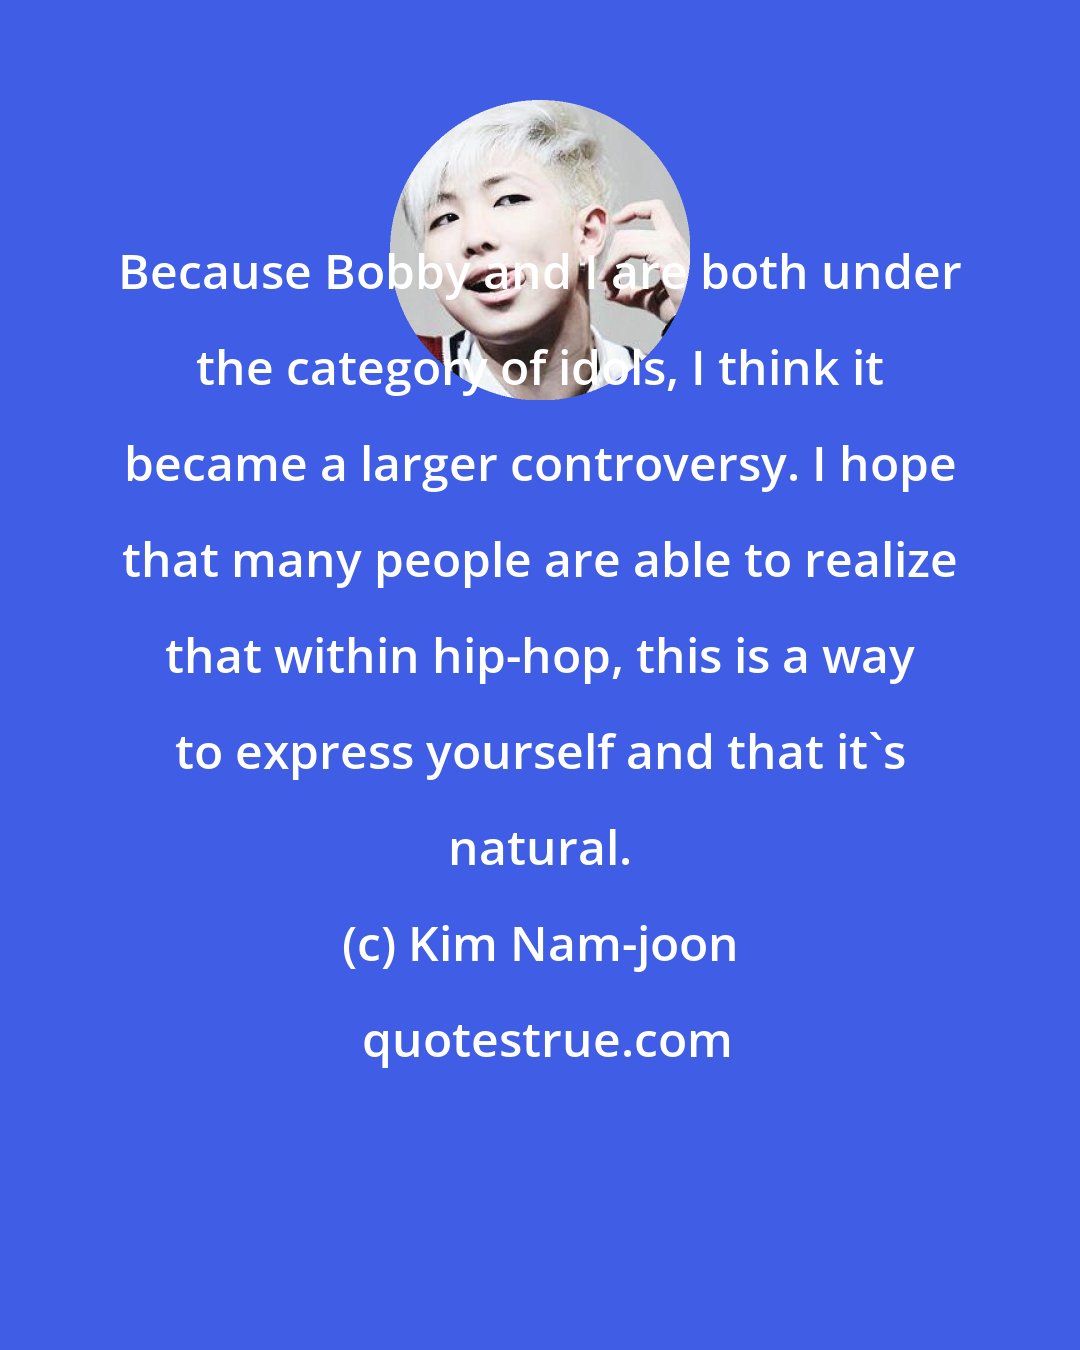 Kim Nam-joon: Because Bobby and I are both under the category of idols, I think it became a larger controversy. I hope that many people are able to realize that within hip-hop, this is a way to express yourself and that it's natural.